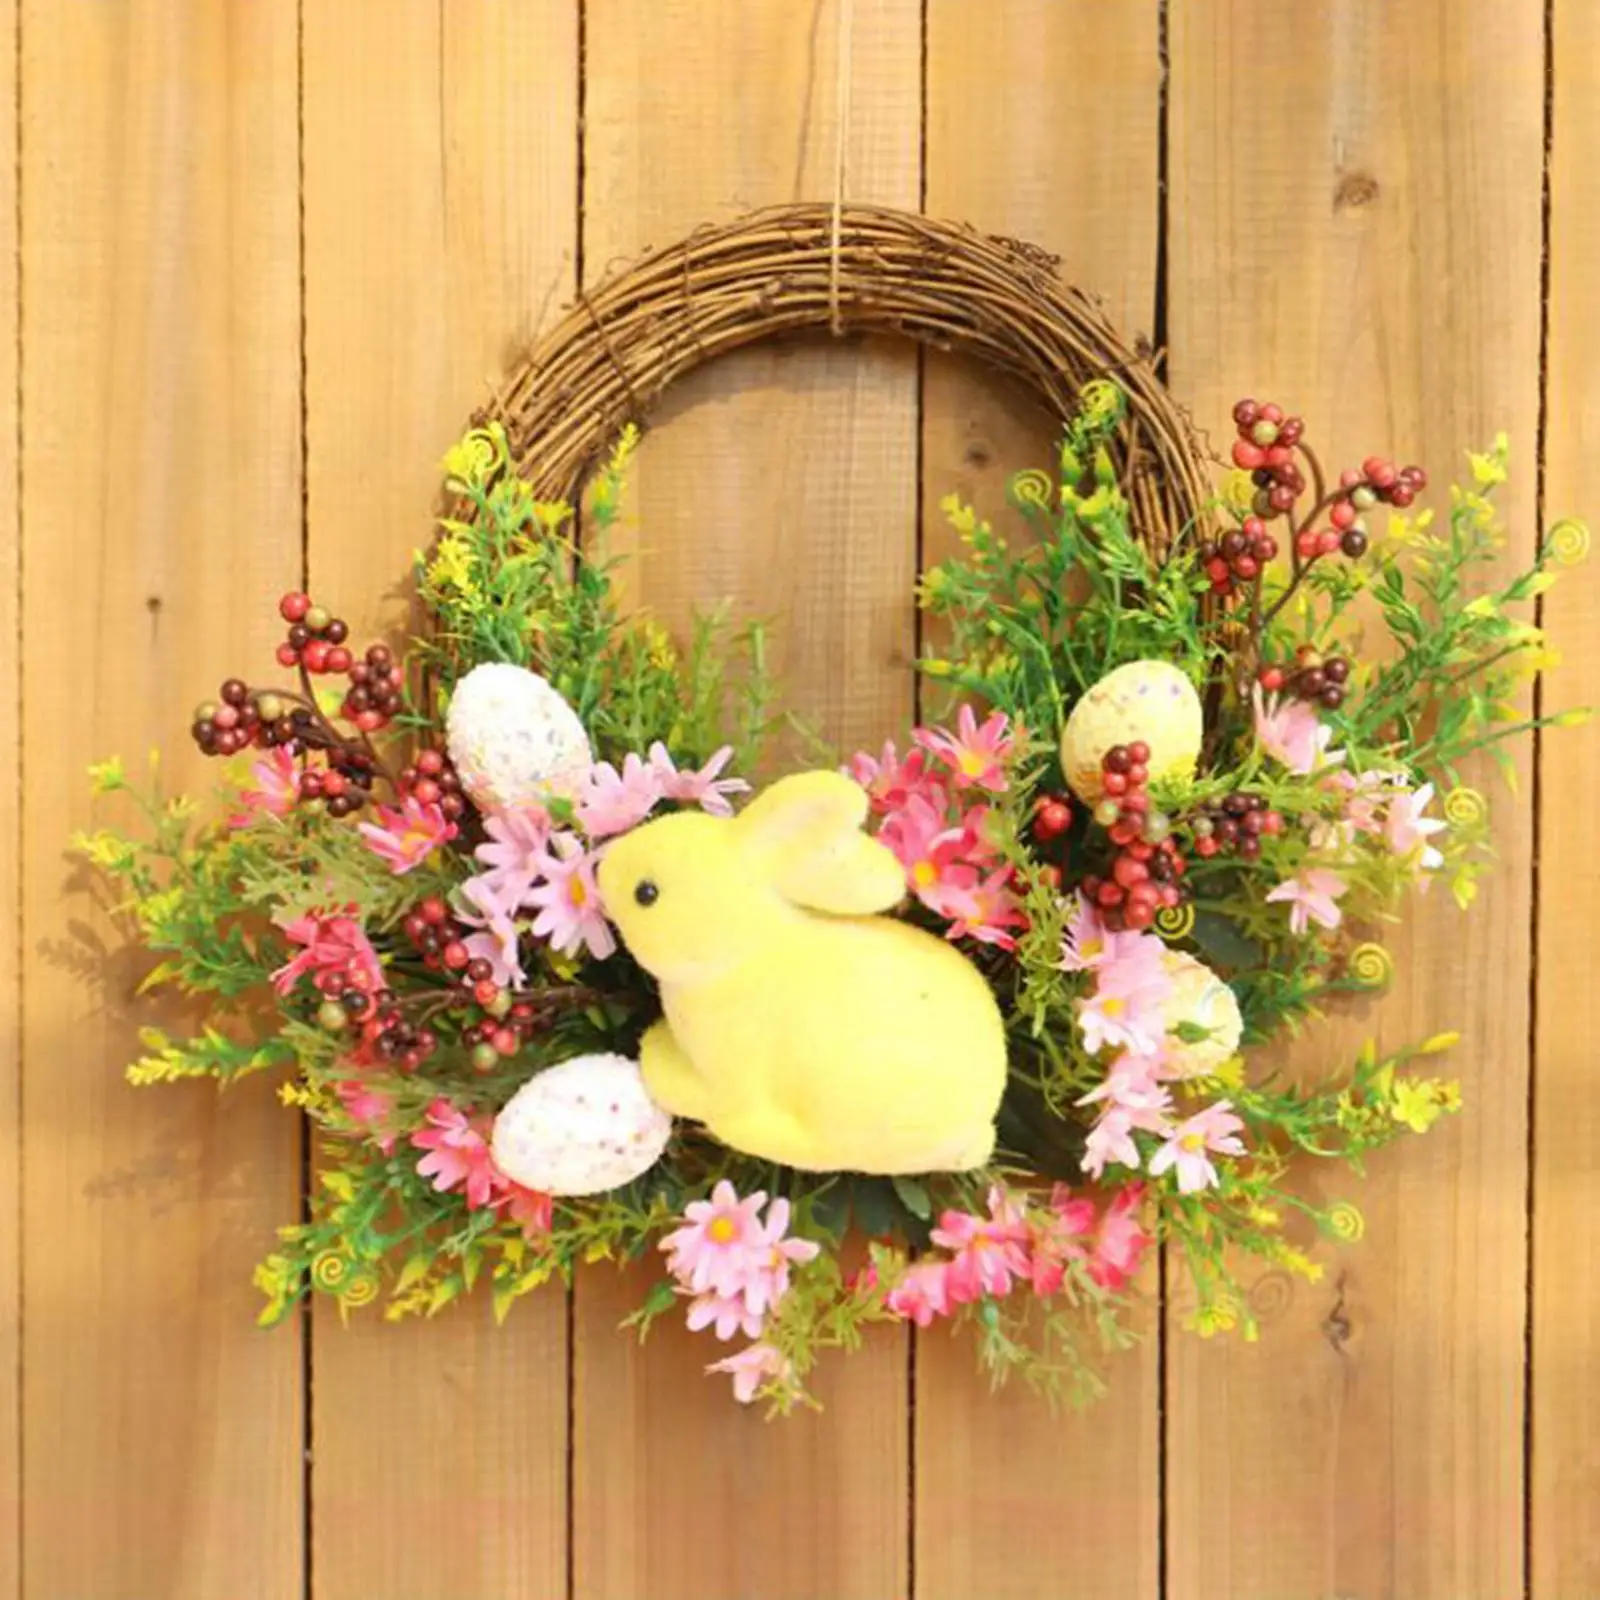 Easter Wreath  Garland with Colorful Eggs Bunny Window for Holiday Front Door Garden Wedding Home Decor